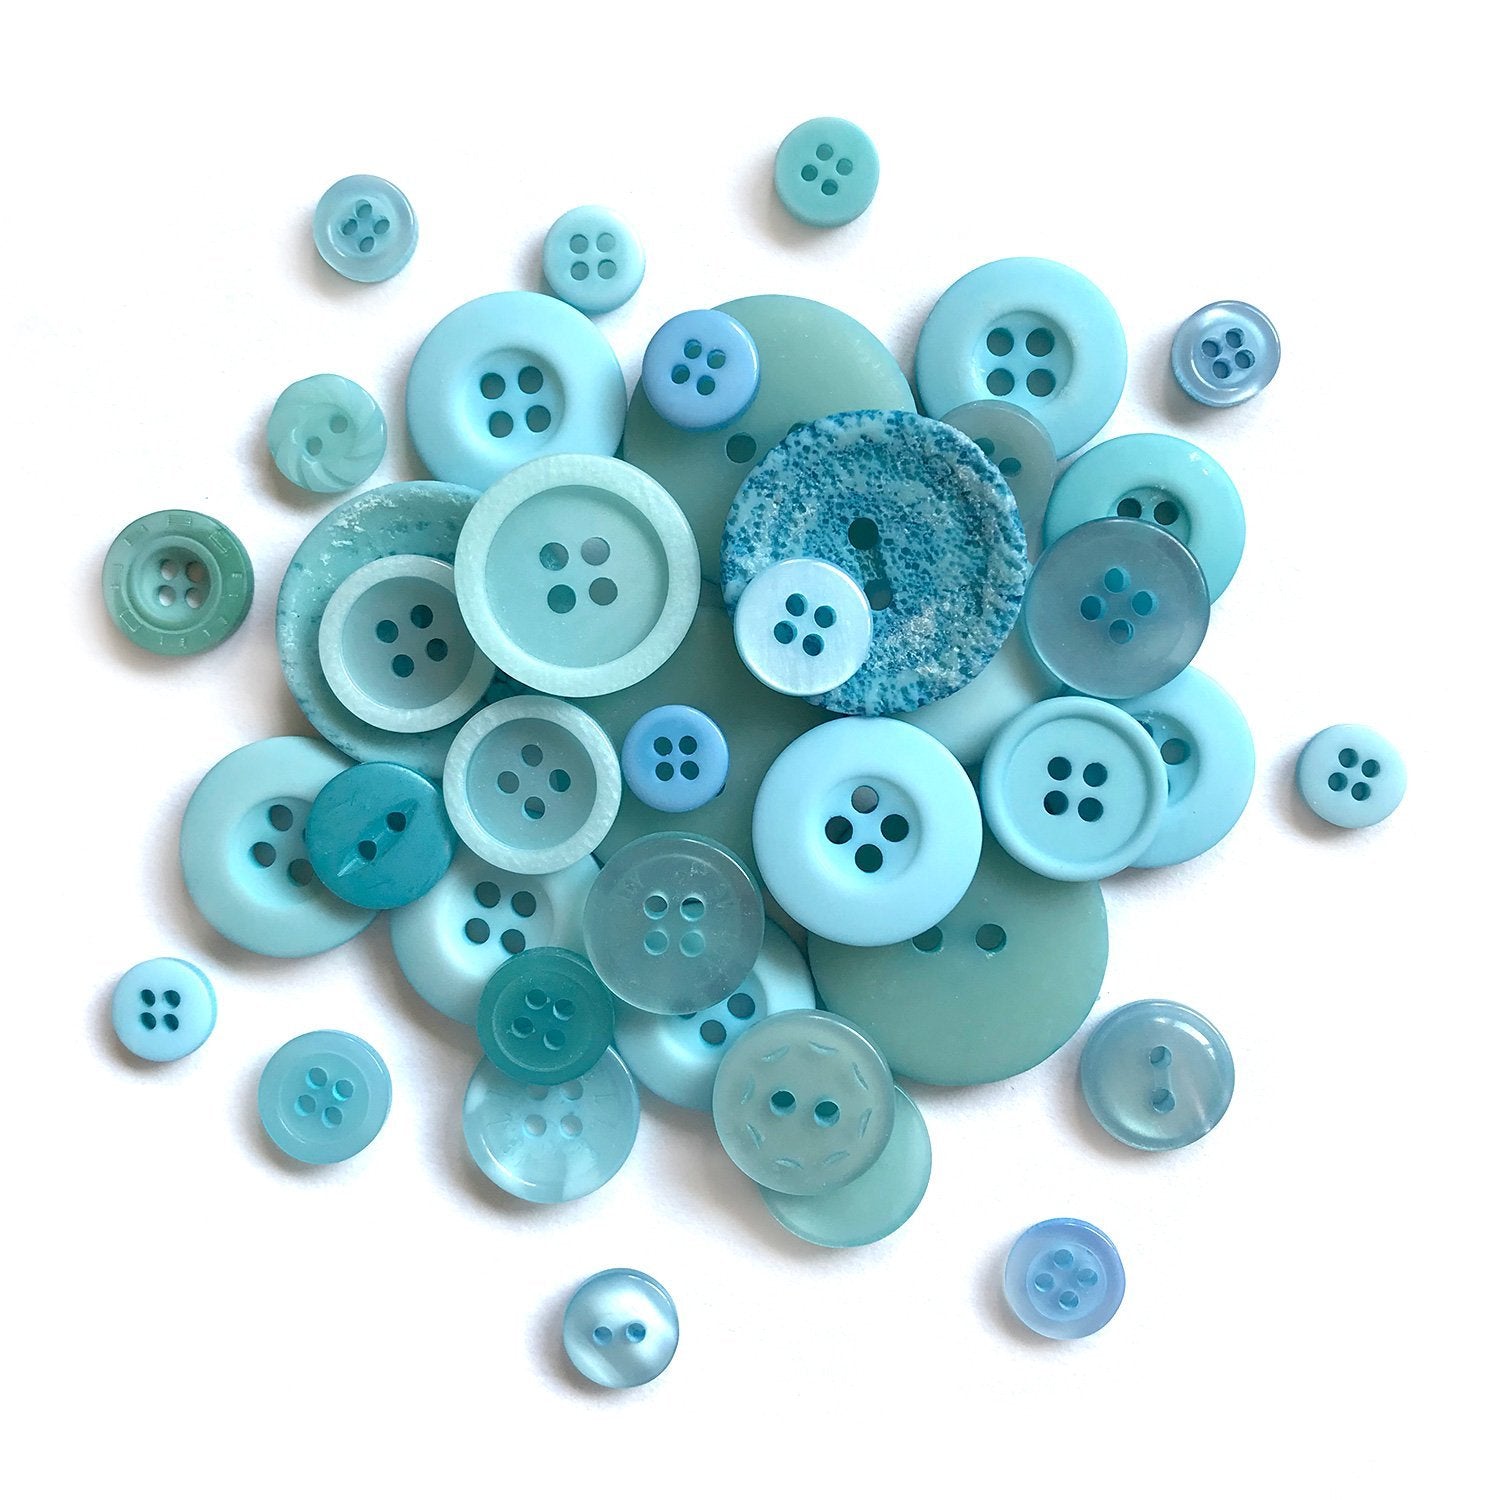 Alfykym 600-700Pcs Blue Buttons for Crafts Bulk Blue Craft Buttons Assorted  Size for Sewing DIY Crafts Decoration